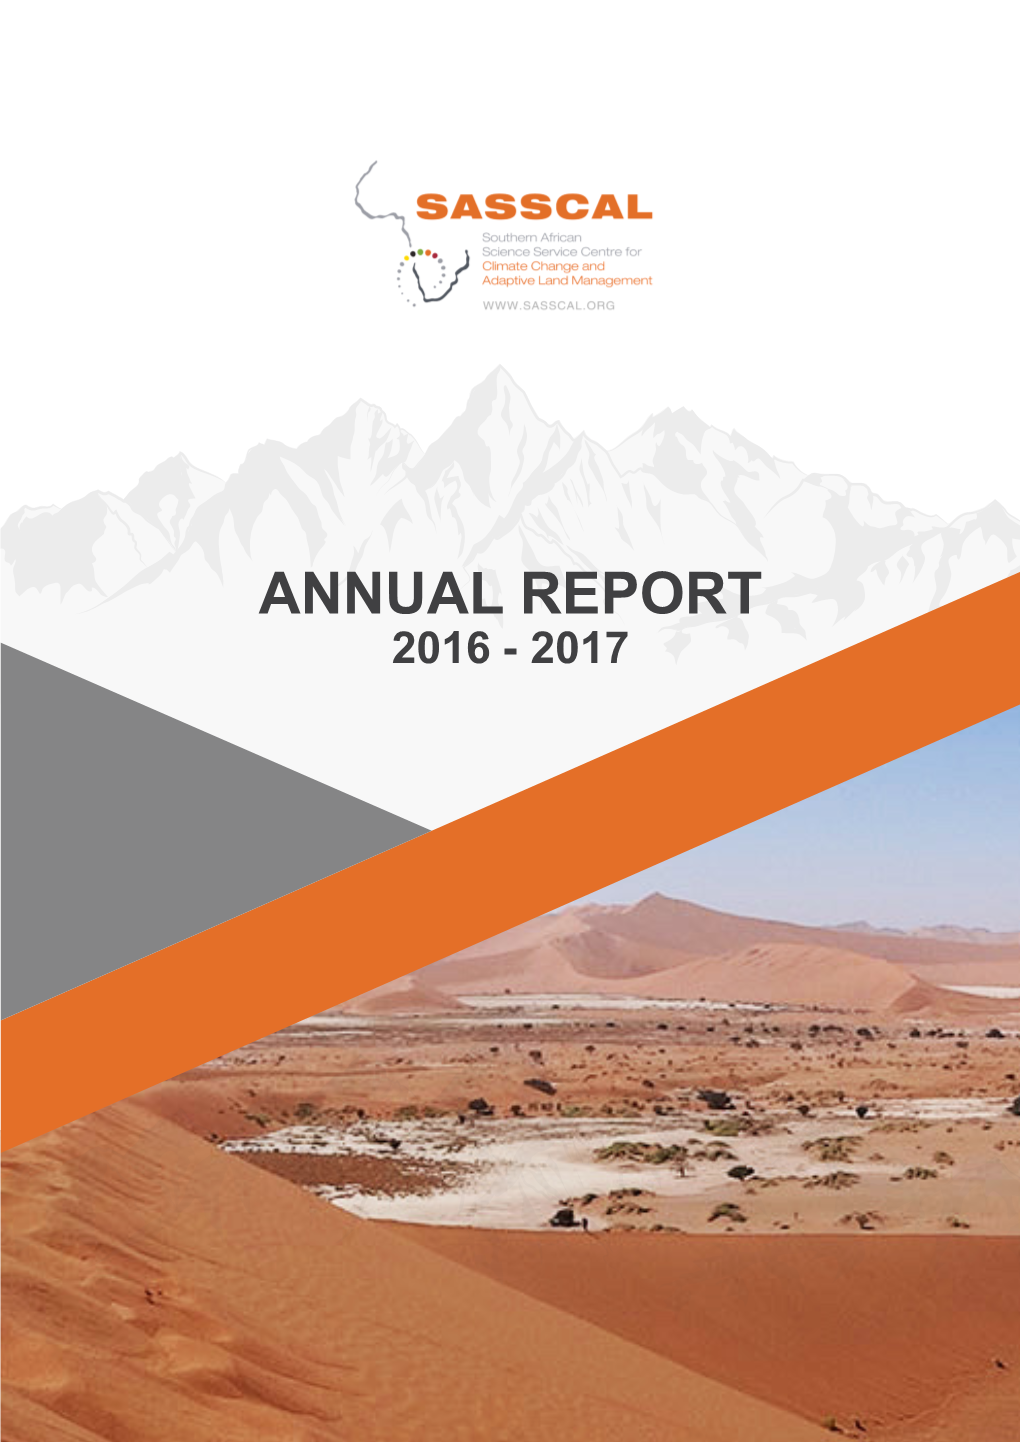 ANNUAL REPORT 2016 - 2017 the Southern African Science Service Centre for Climate Change